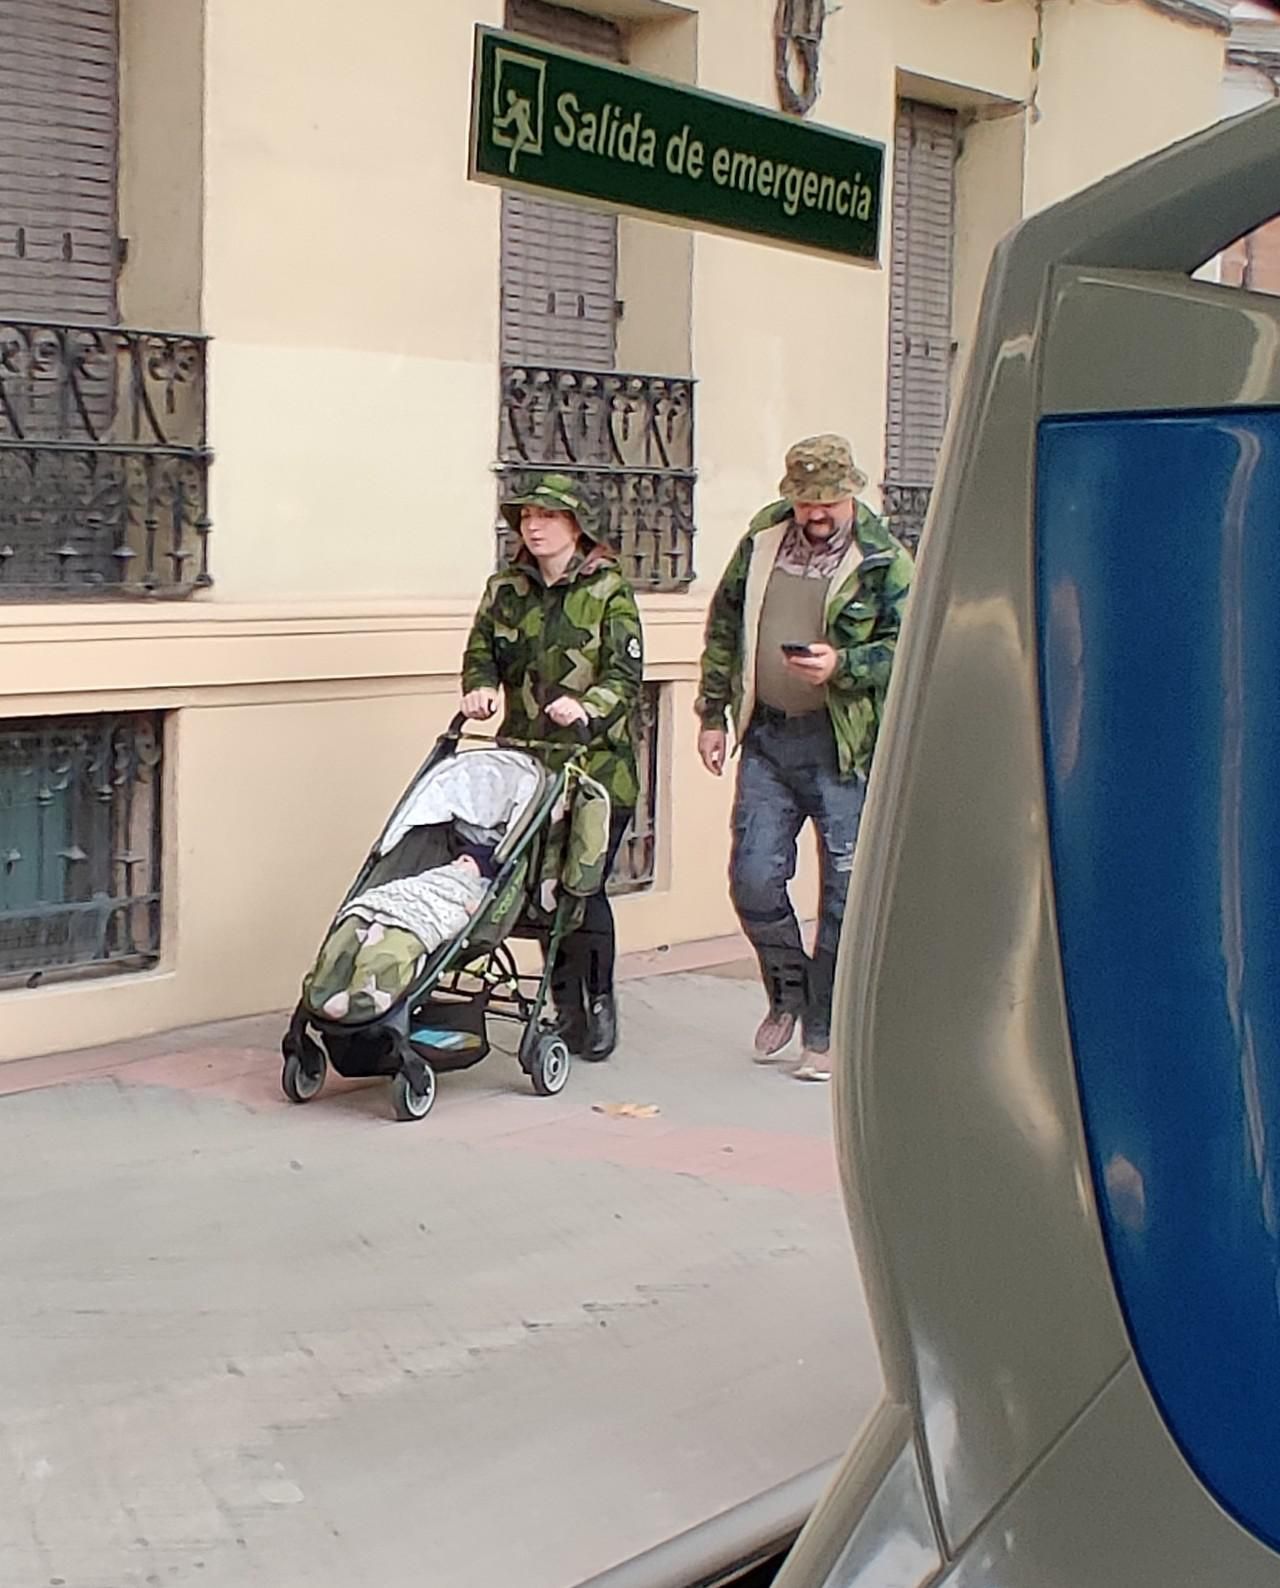 A stroller left alone in the middle of the city. No parents or baby to be seen